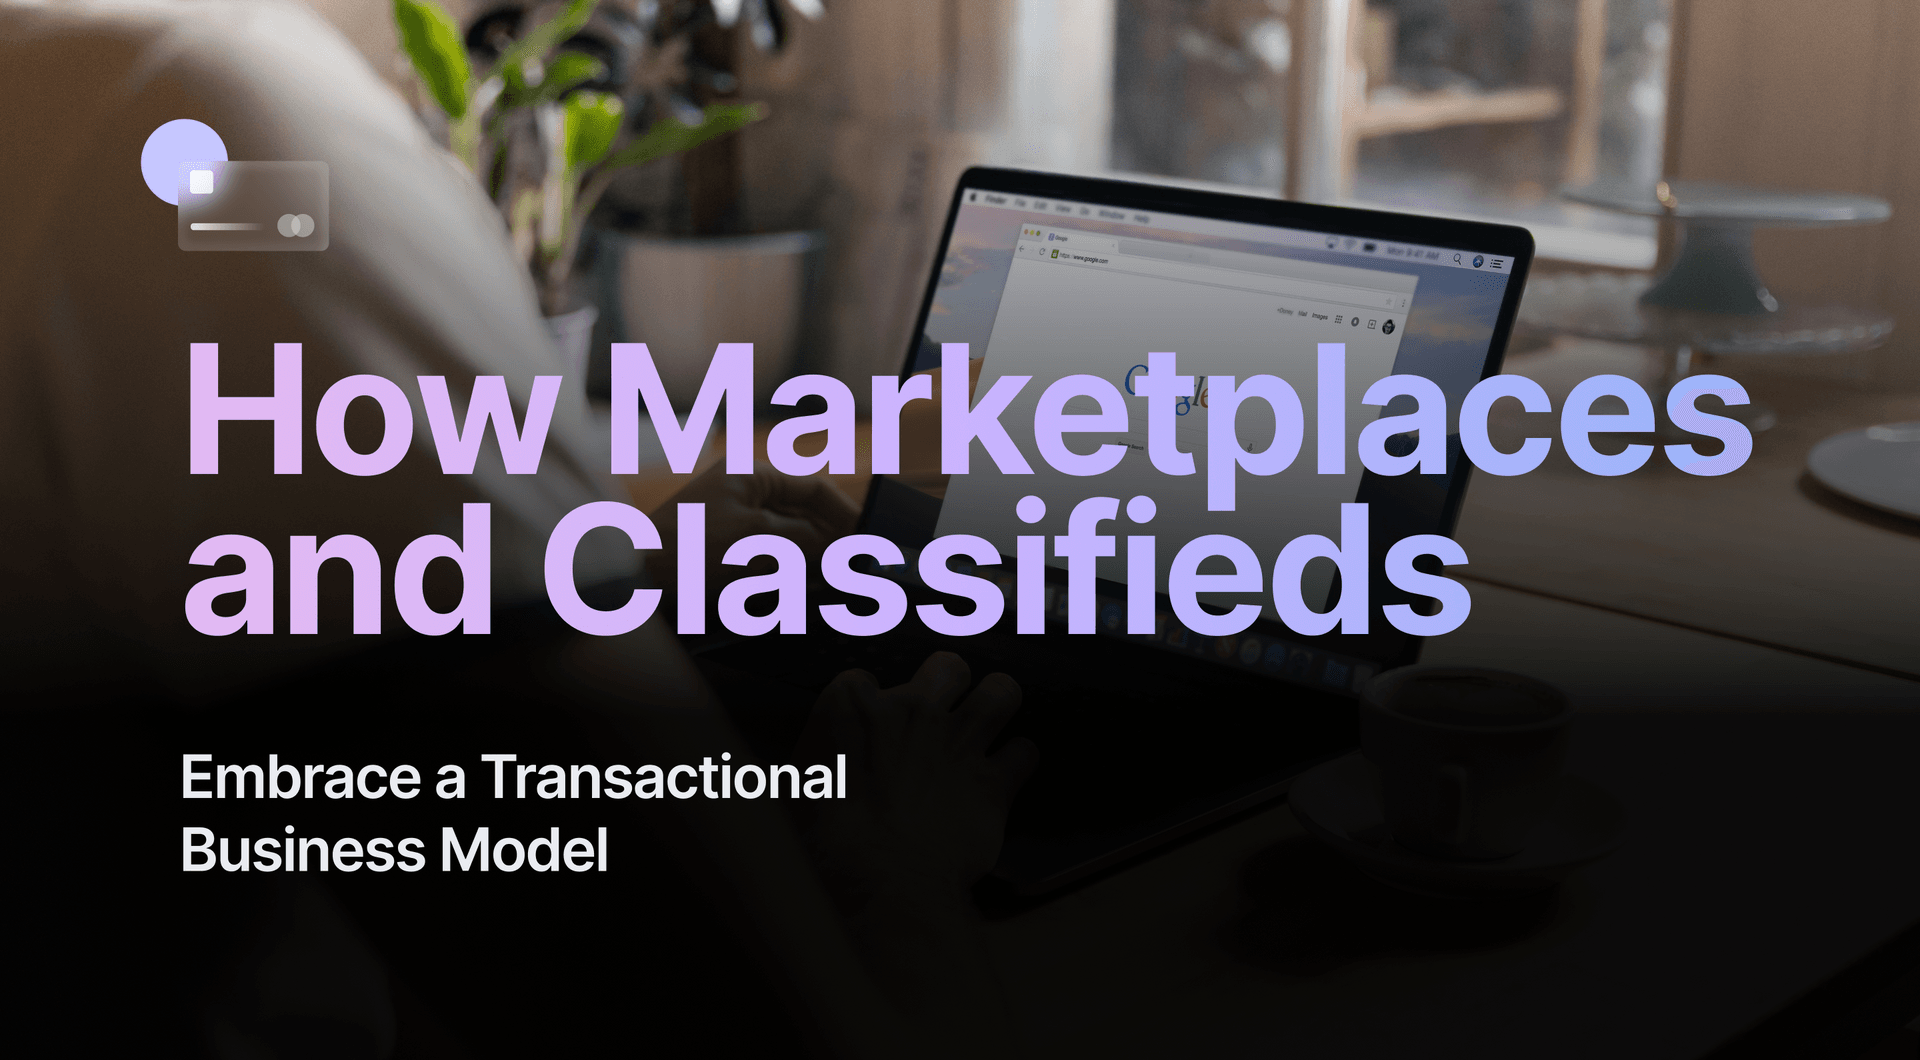 Picture for Why Marketplaces and Classifieds are Shifting to a Transactional Business Model article